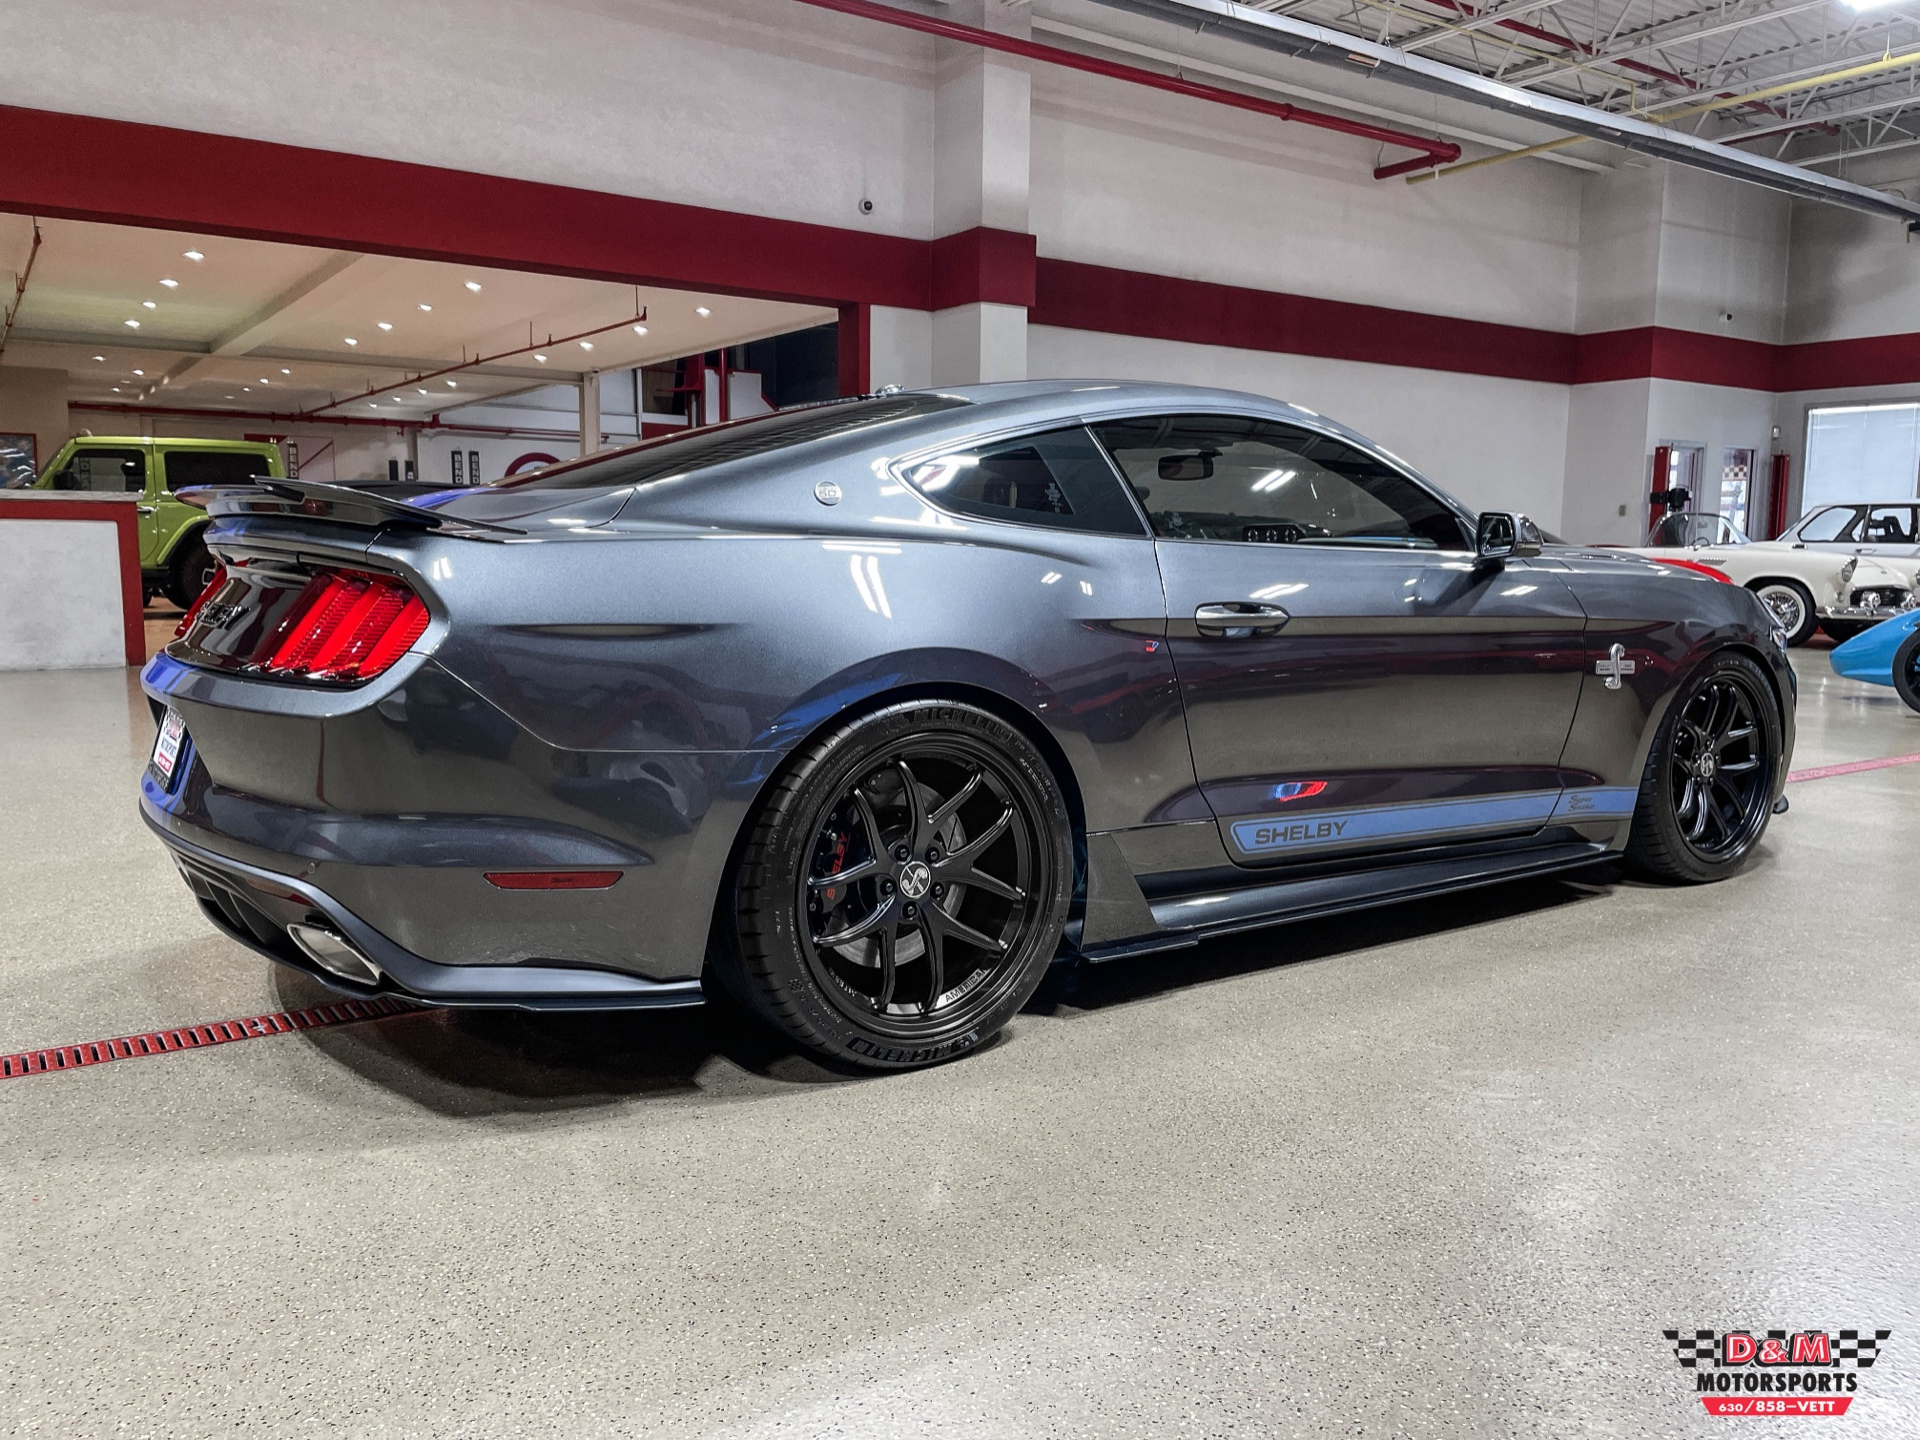 Used 2017 Ford Mustang Shelby Super Snake | Glen Ellyn, IL